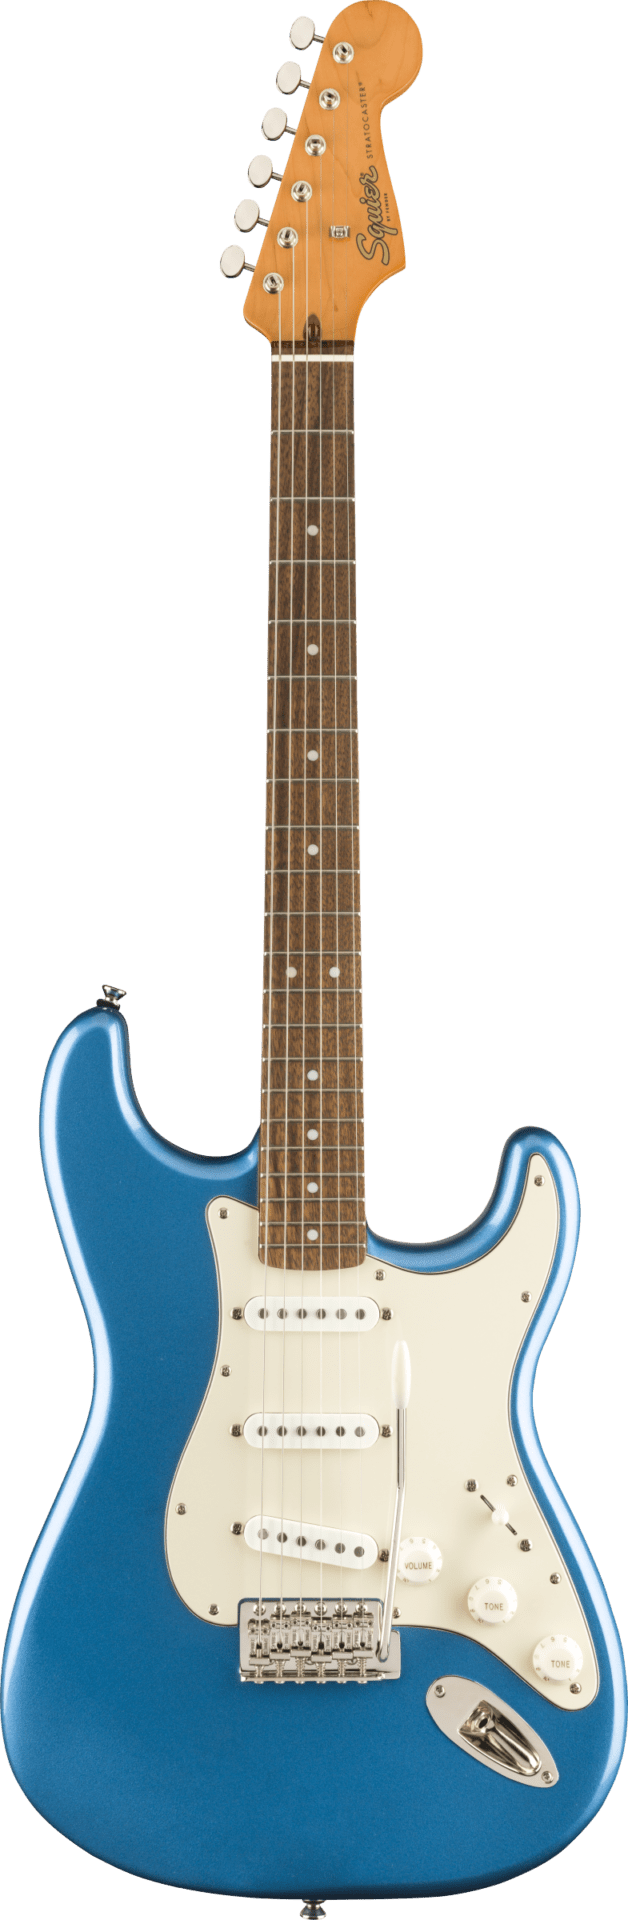 SQUIER CLASSIC VIBE 60 STRATOCASTER